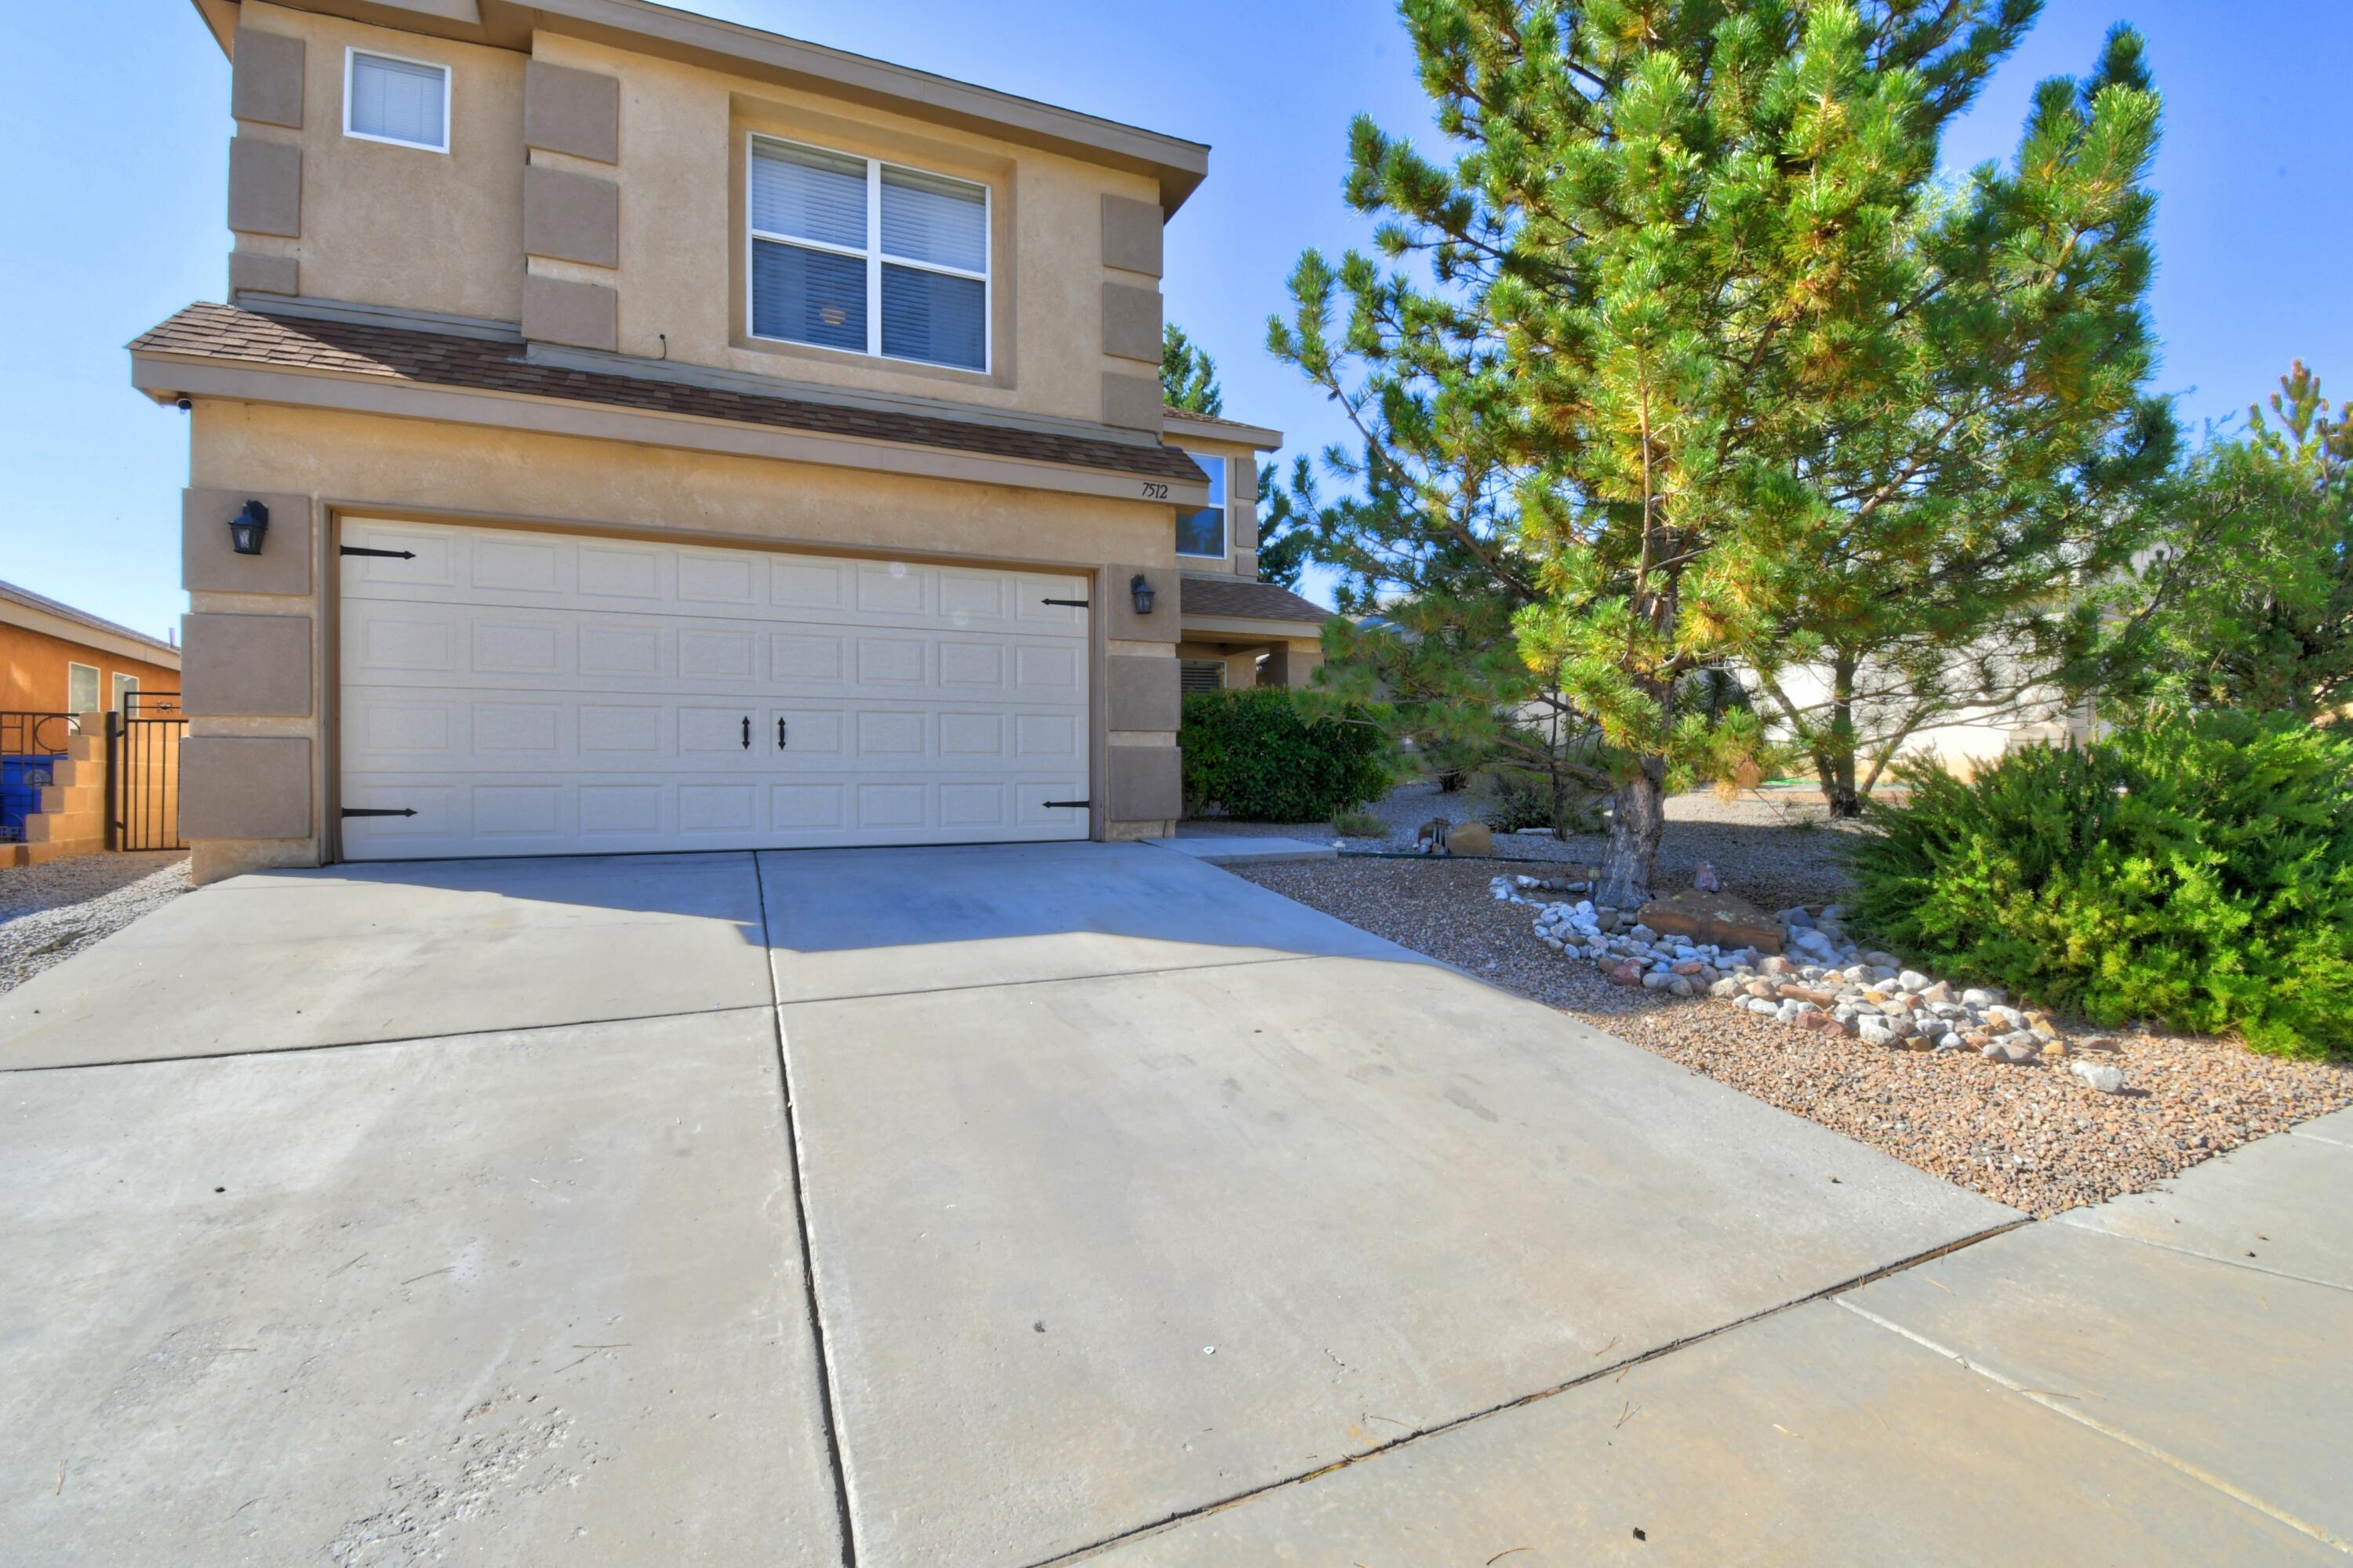 Open House October 2, 2022. One Owner Home in a Great, Quiet Ventana area. Roof, Garage Door & Dishwasher replaced 2022. Cheerful eat-in Kitchen w/Pantry, Stainless & Black appliances & is open to Family room + Formal Dining. Generous PrimaryBedroom & 10x11 Loft.Carpet upstairs-2020-No carpet downstairs. BY has Southwest Covered Patio, 8x10 Tuff Shed & raised Block Wall w/Trees-Private too! No 2 story looking down on this BY! Ready for grass or rock.  Elect boxes installed for Hot Tub & 1 for fountain. Audio/Video Ring doorbell in use.Trendy Schools:Volcano Vista High & Tony Hillerman.Paved Walking/Biking Trails/Community Dog RunsLighted Park/Community Swimming PoolHOA Lighted Park, Fields, & Picnic Areas.Extra flooring tile boxes for You.